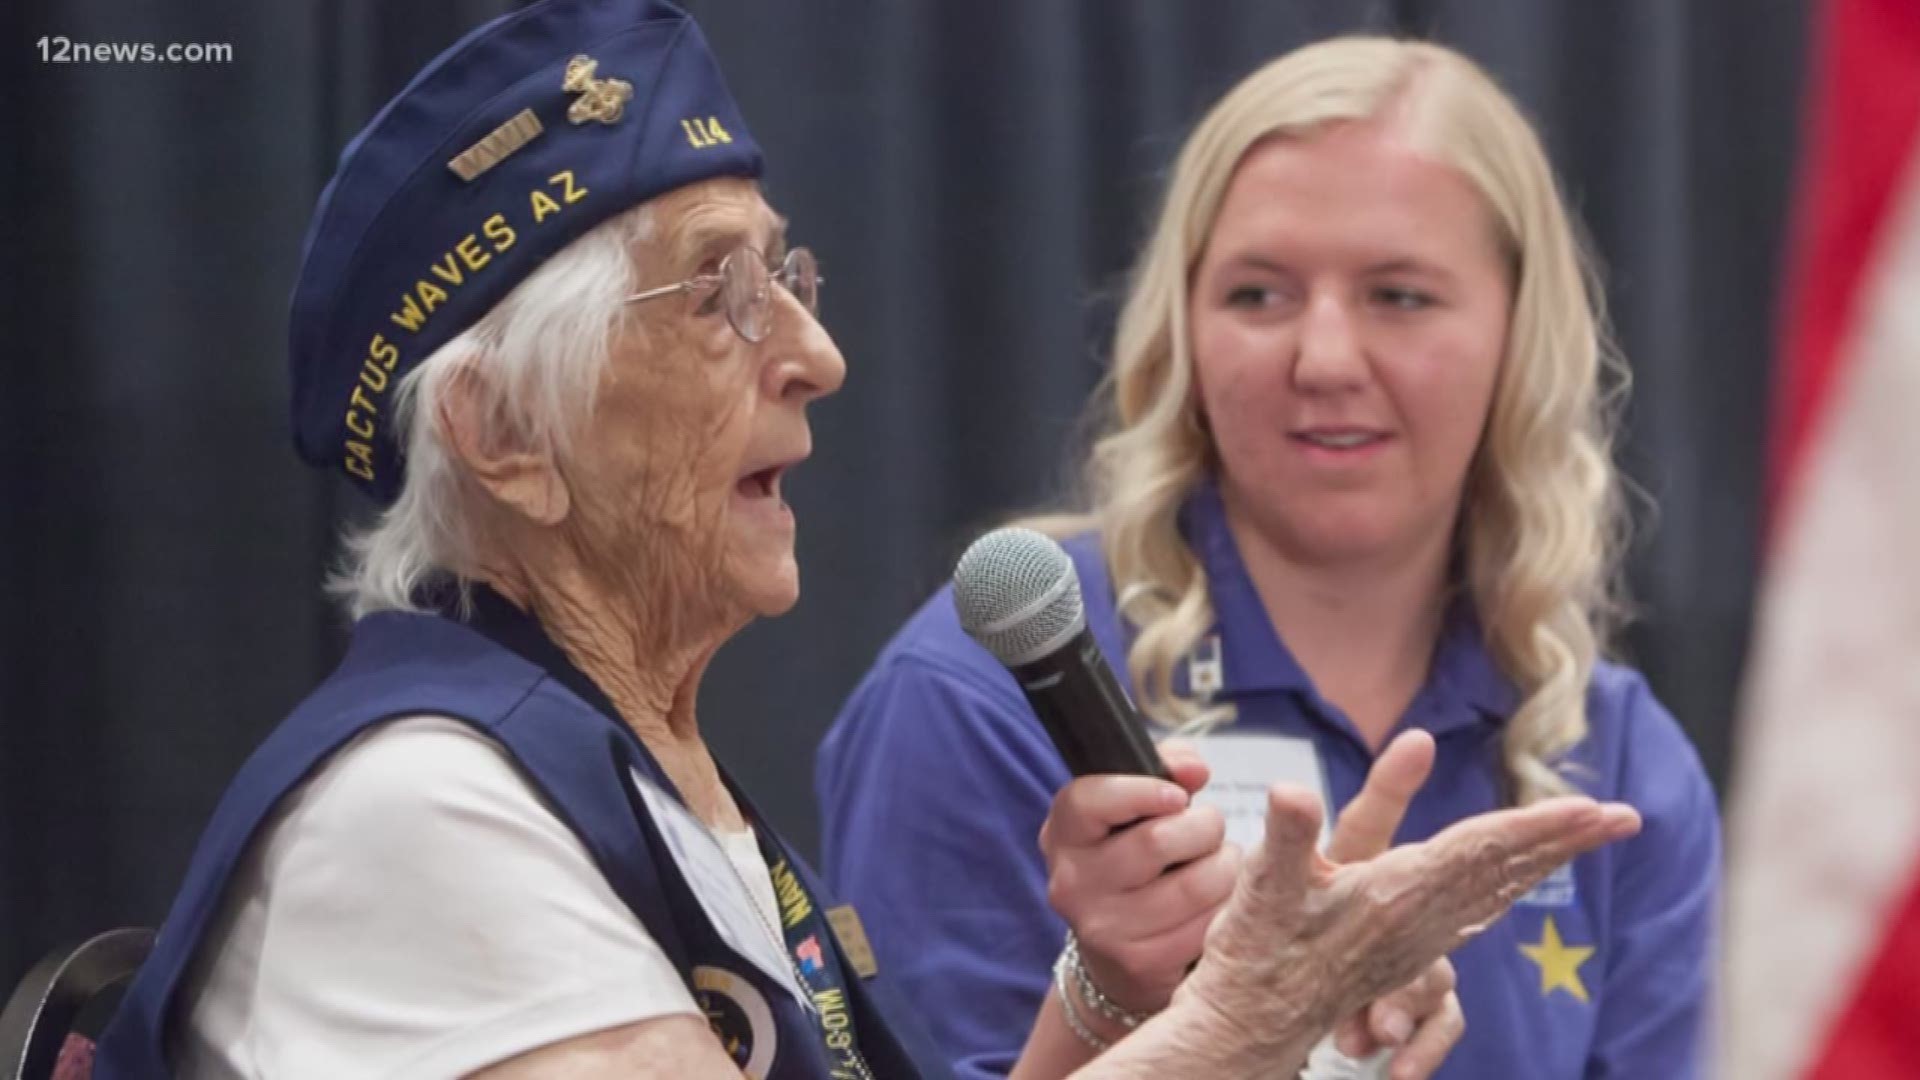 A program in Arizona is giving students the opportunities to hear and preserve veterans' stories.